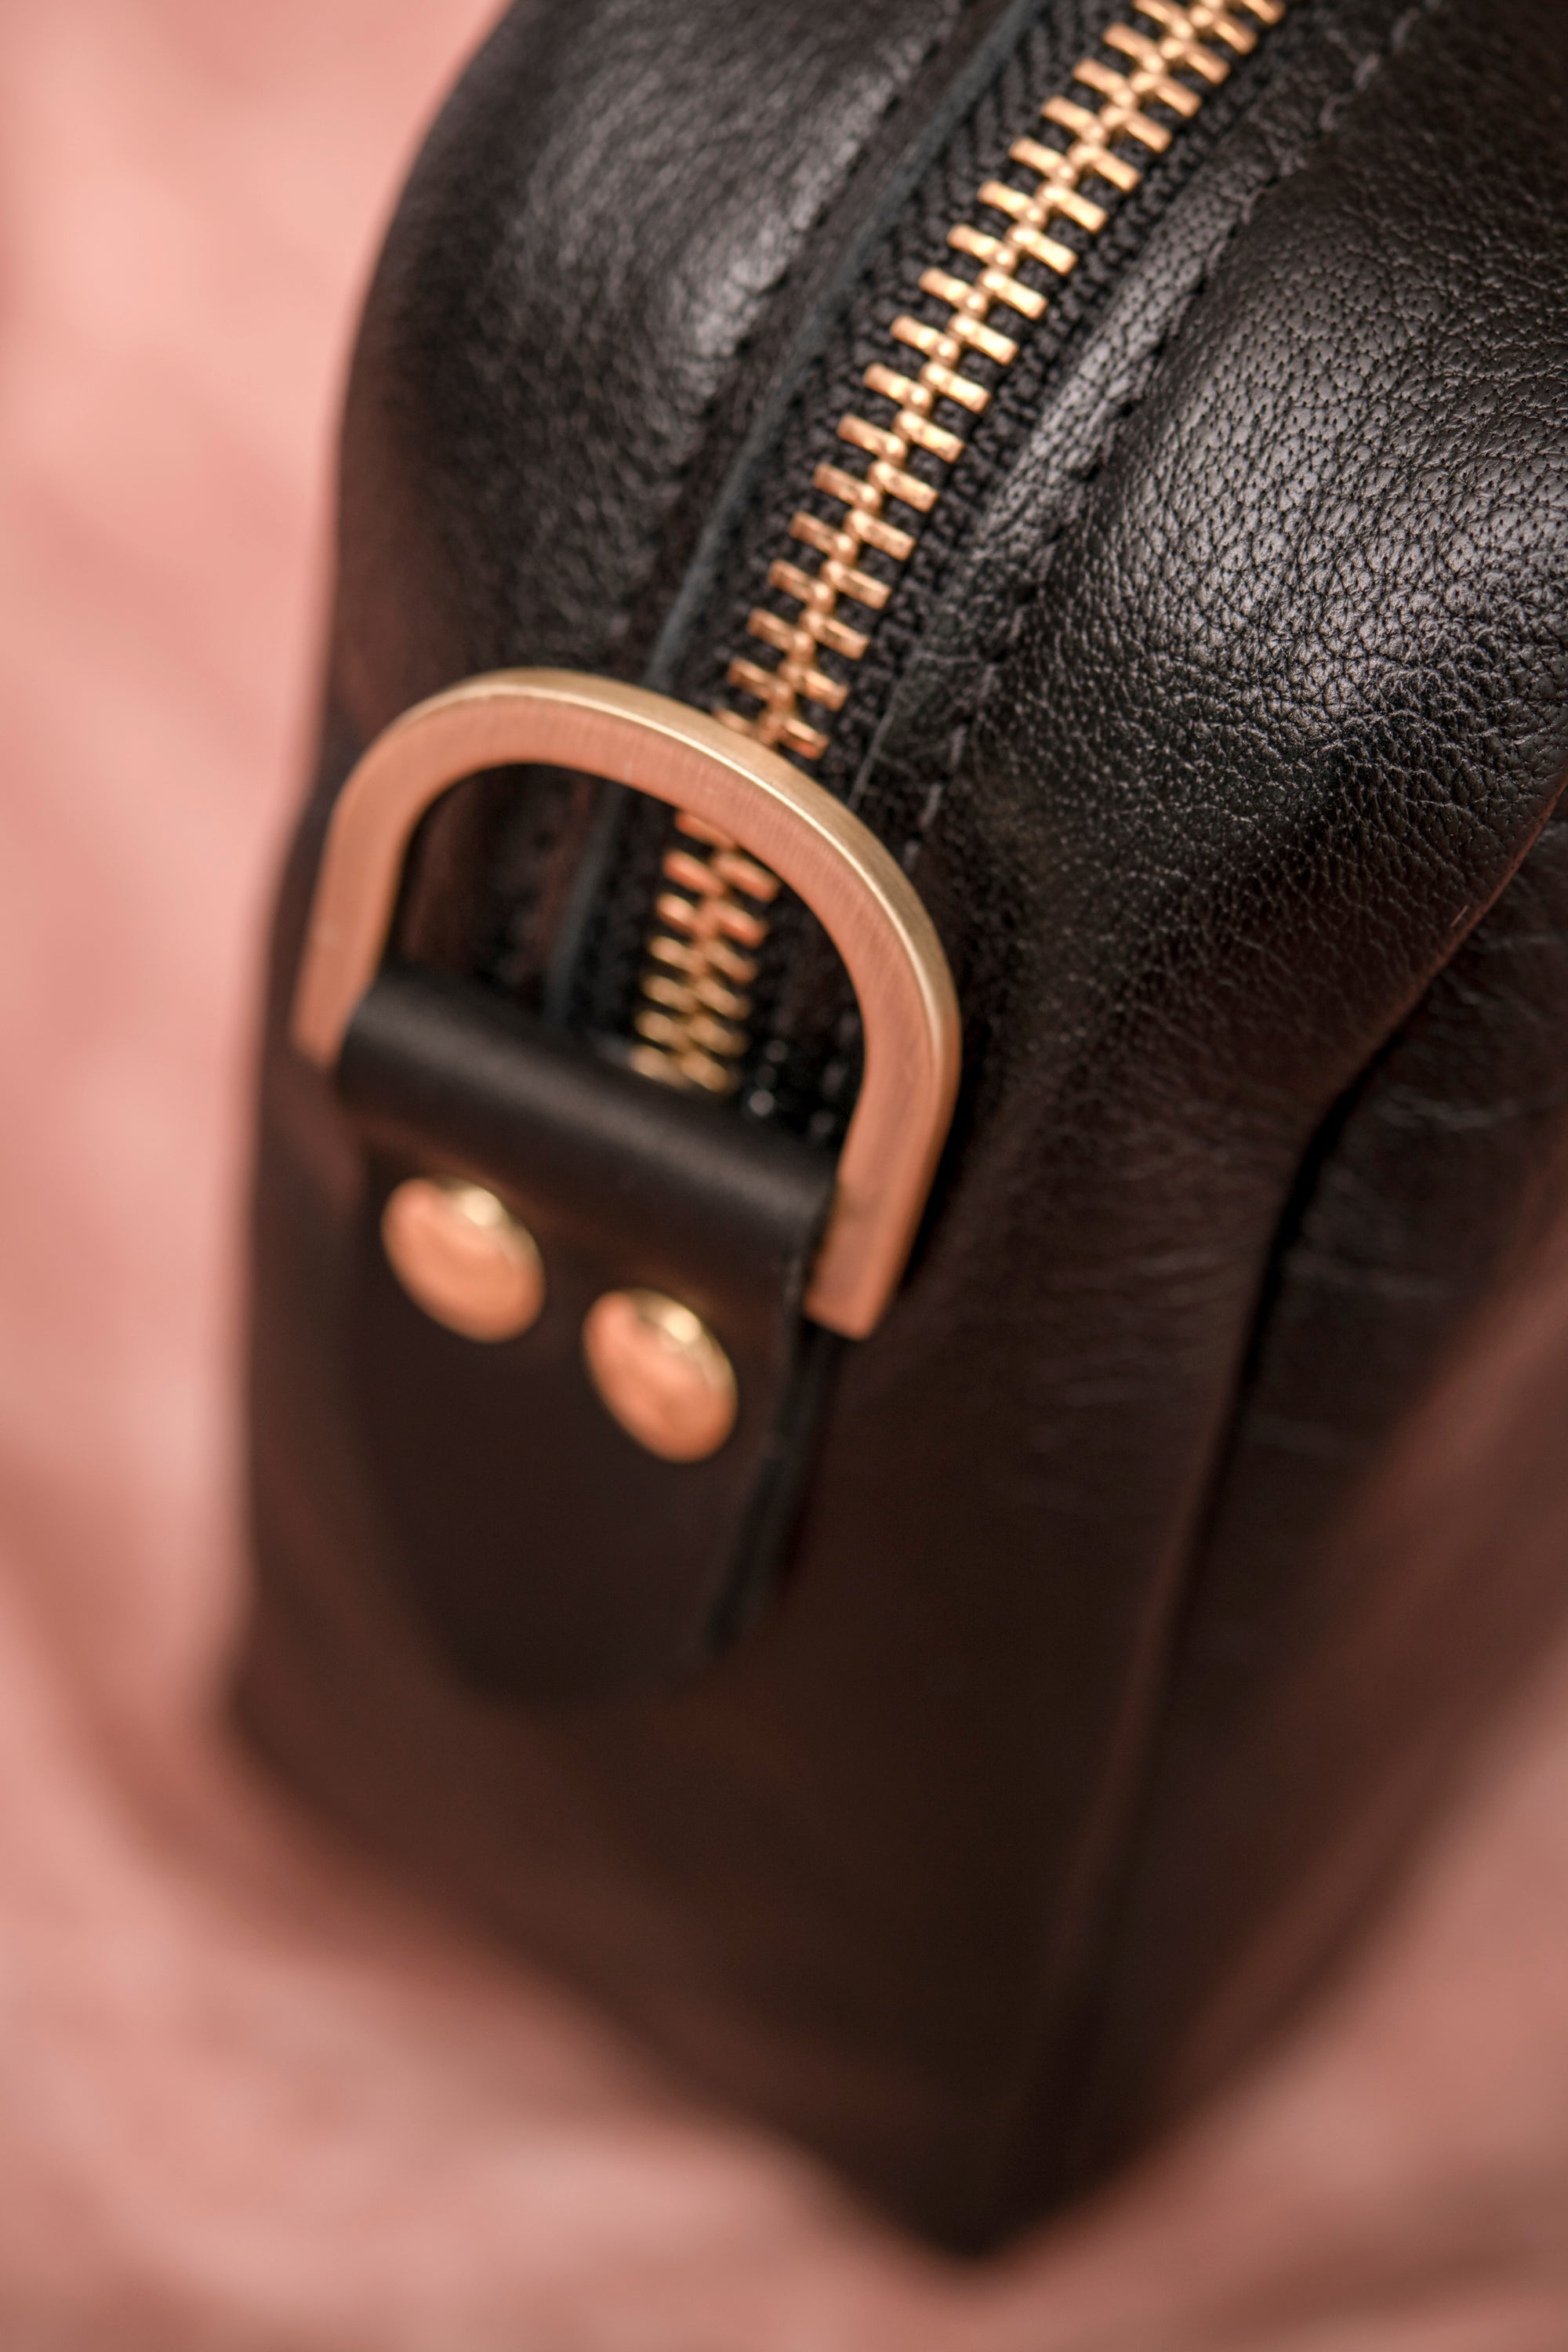 Veinage, made to order Leather Bag with brass snake chain tassel CARTIER, handmade in Montreal, Canada